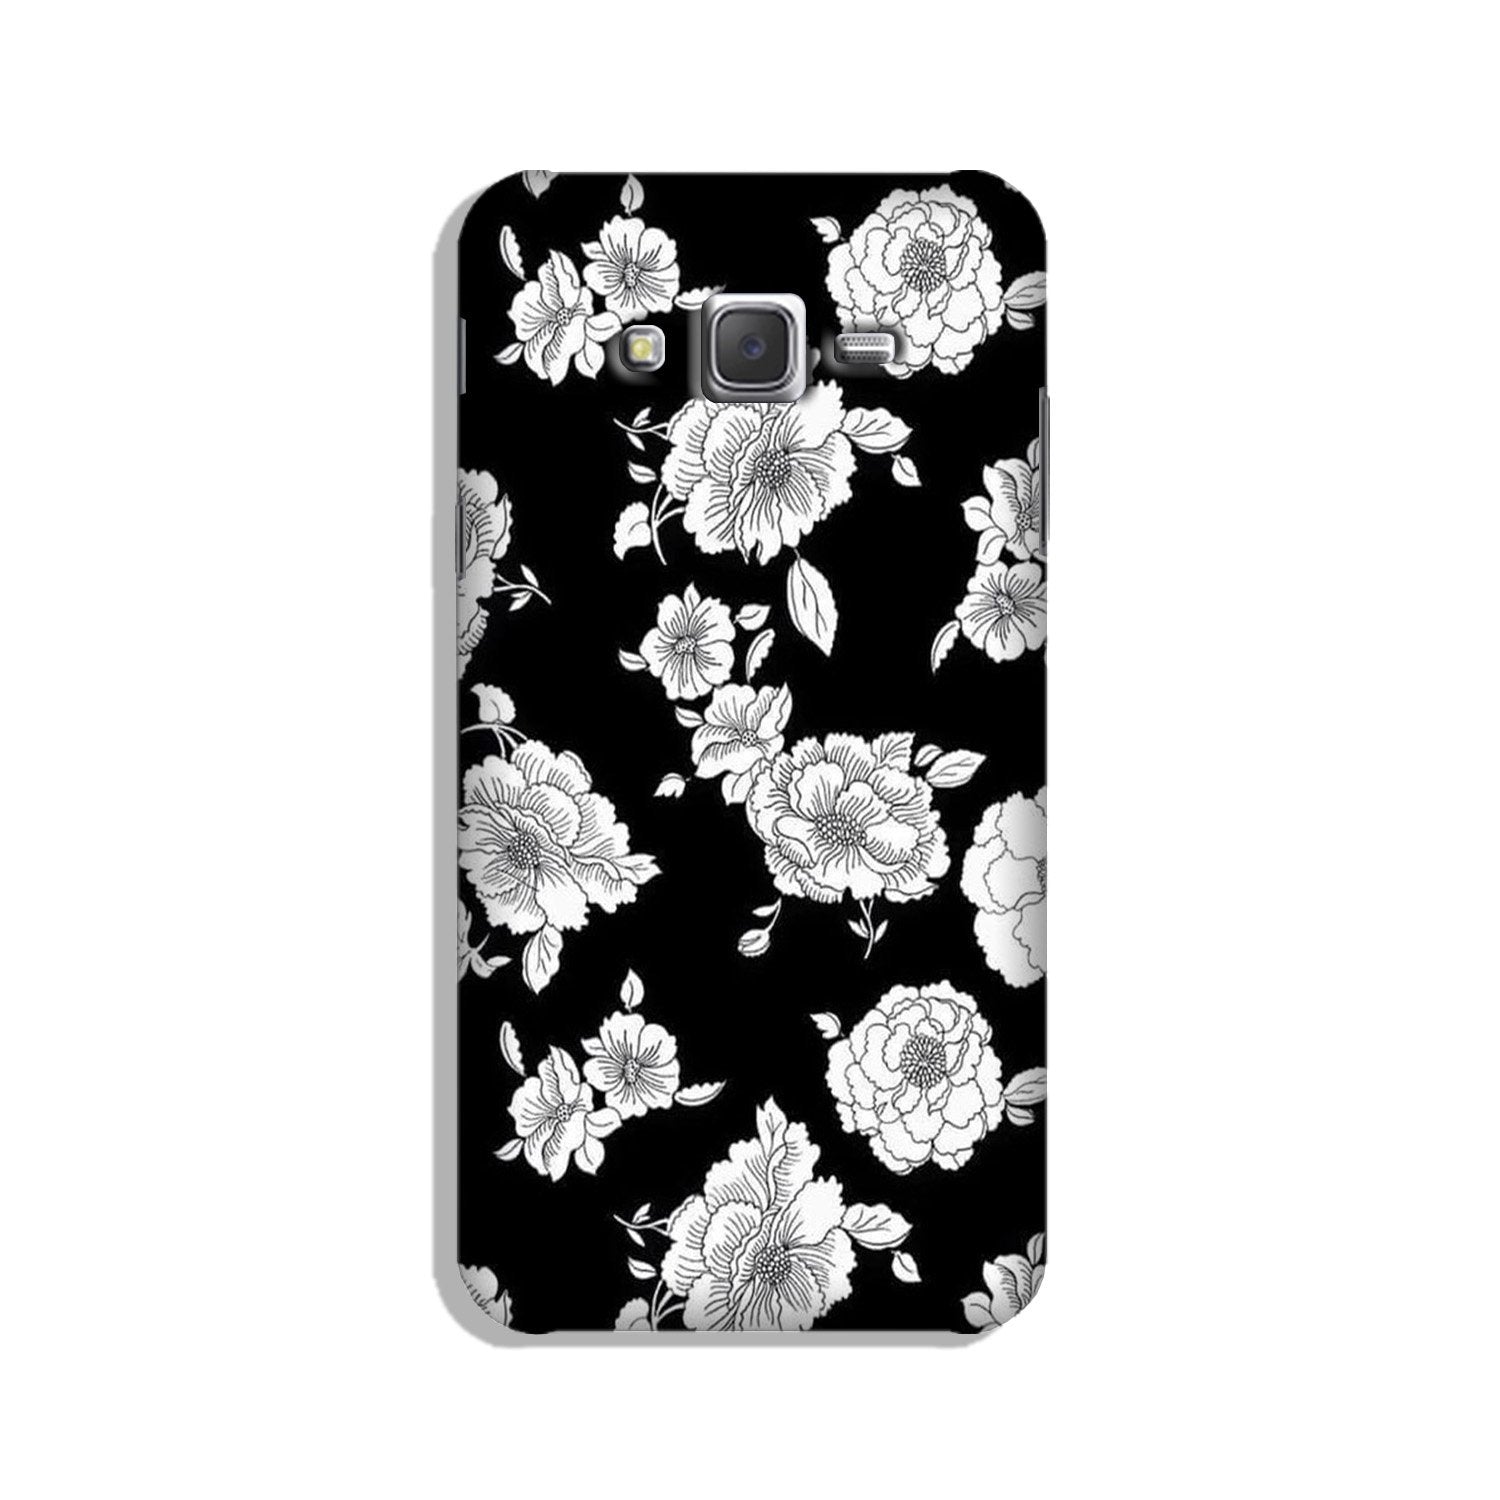 White flowers Black Background Case for Galaxy J5 (2015)